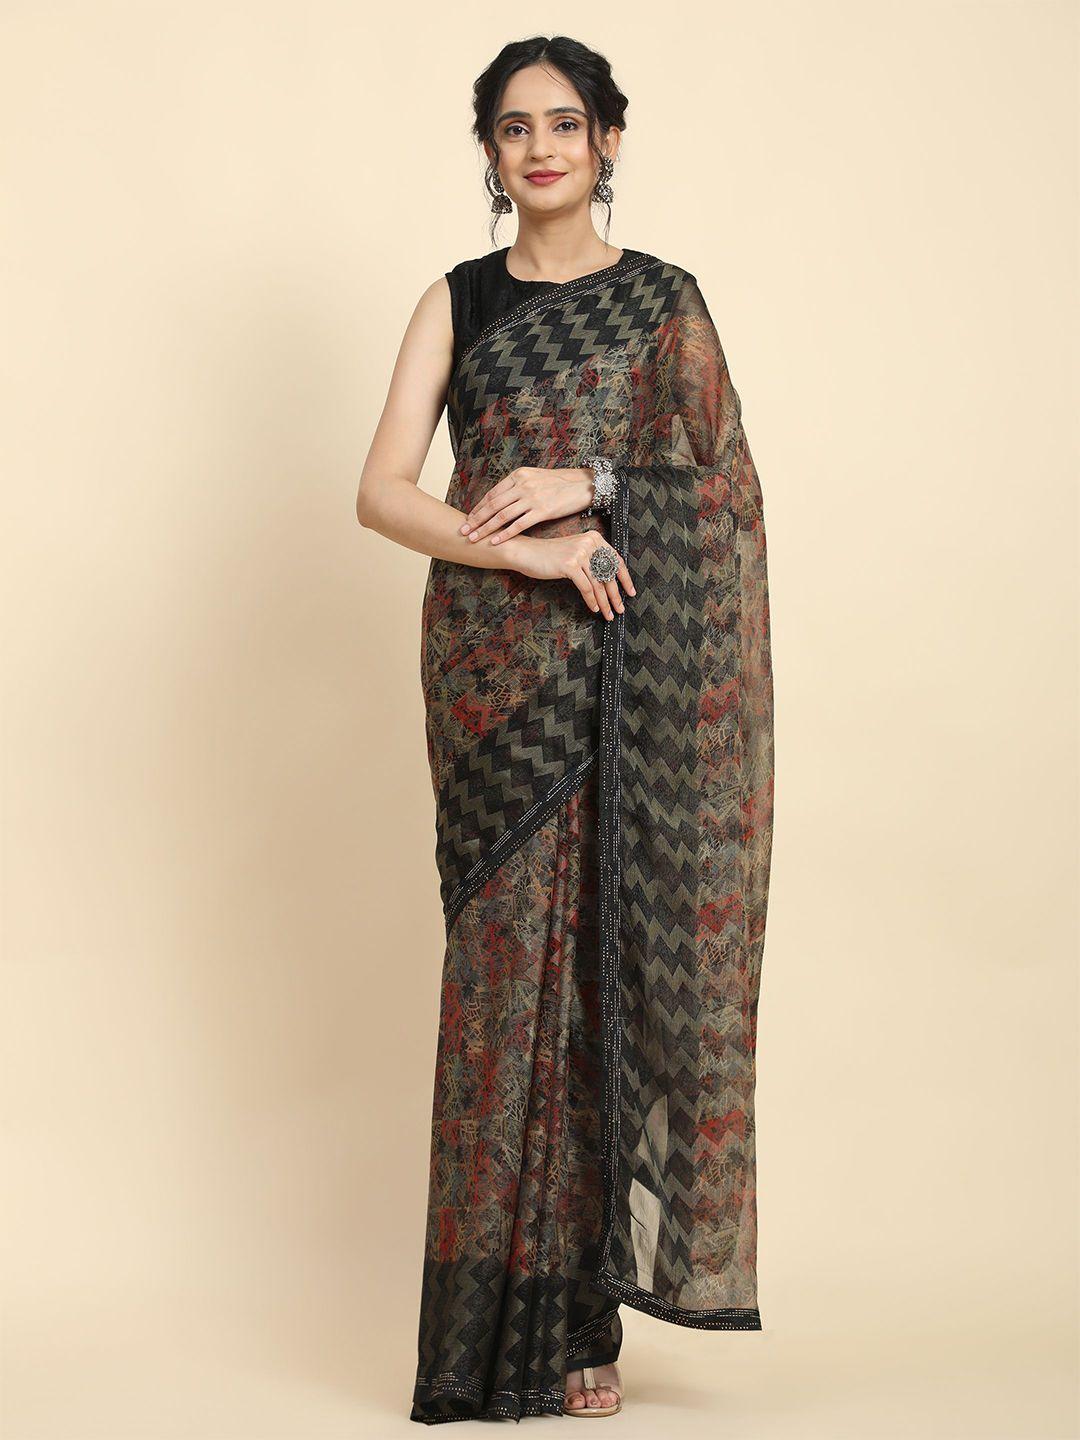 rachna floral printed beads and stones embellished brasso saree